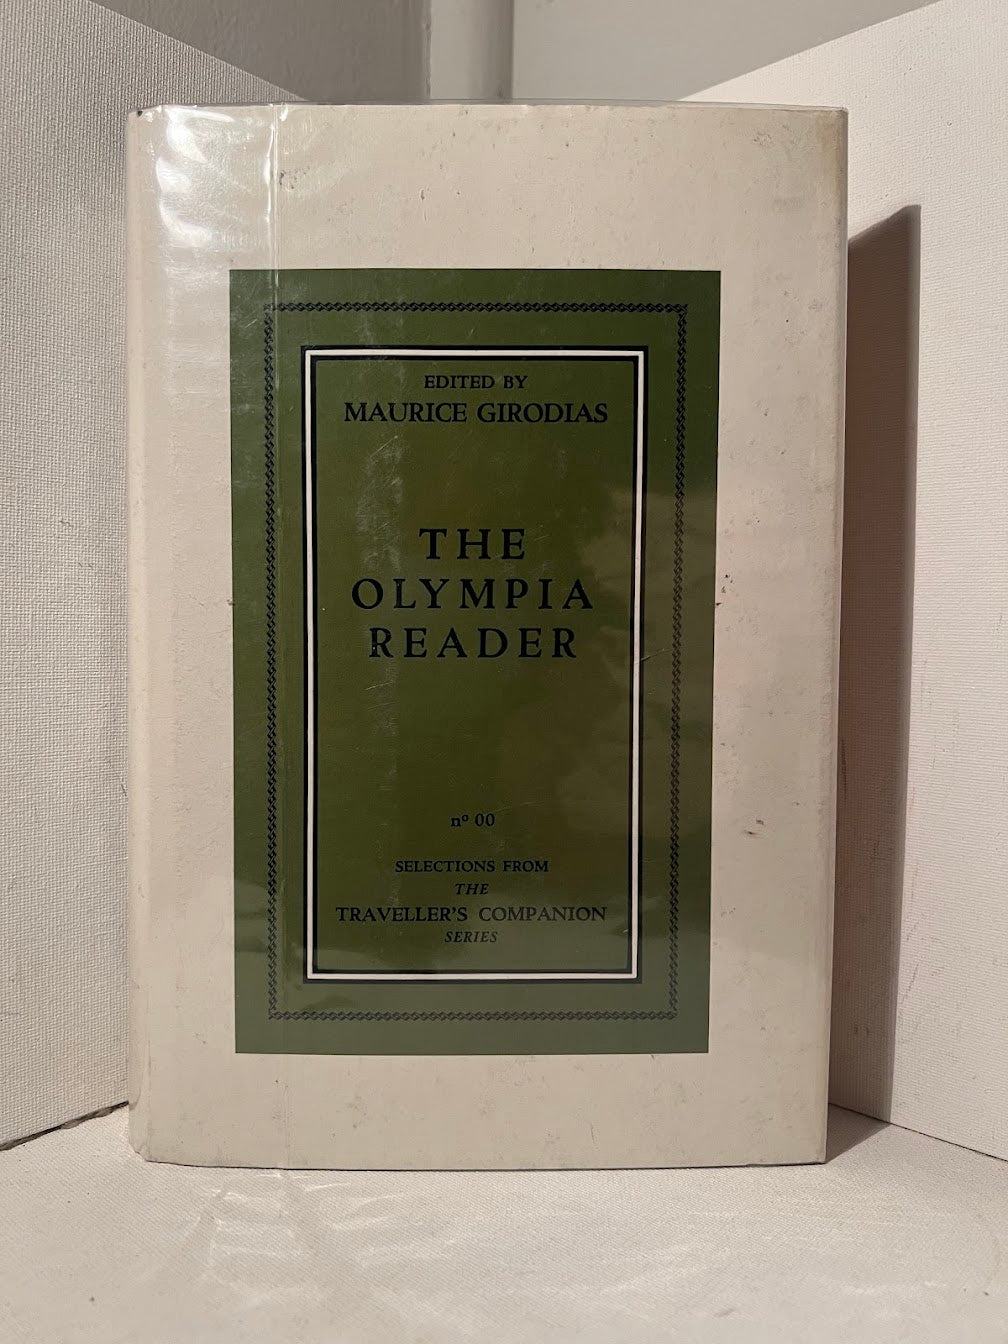 The Olympia Reader edited by Maurice Girodias